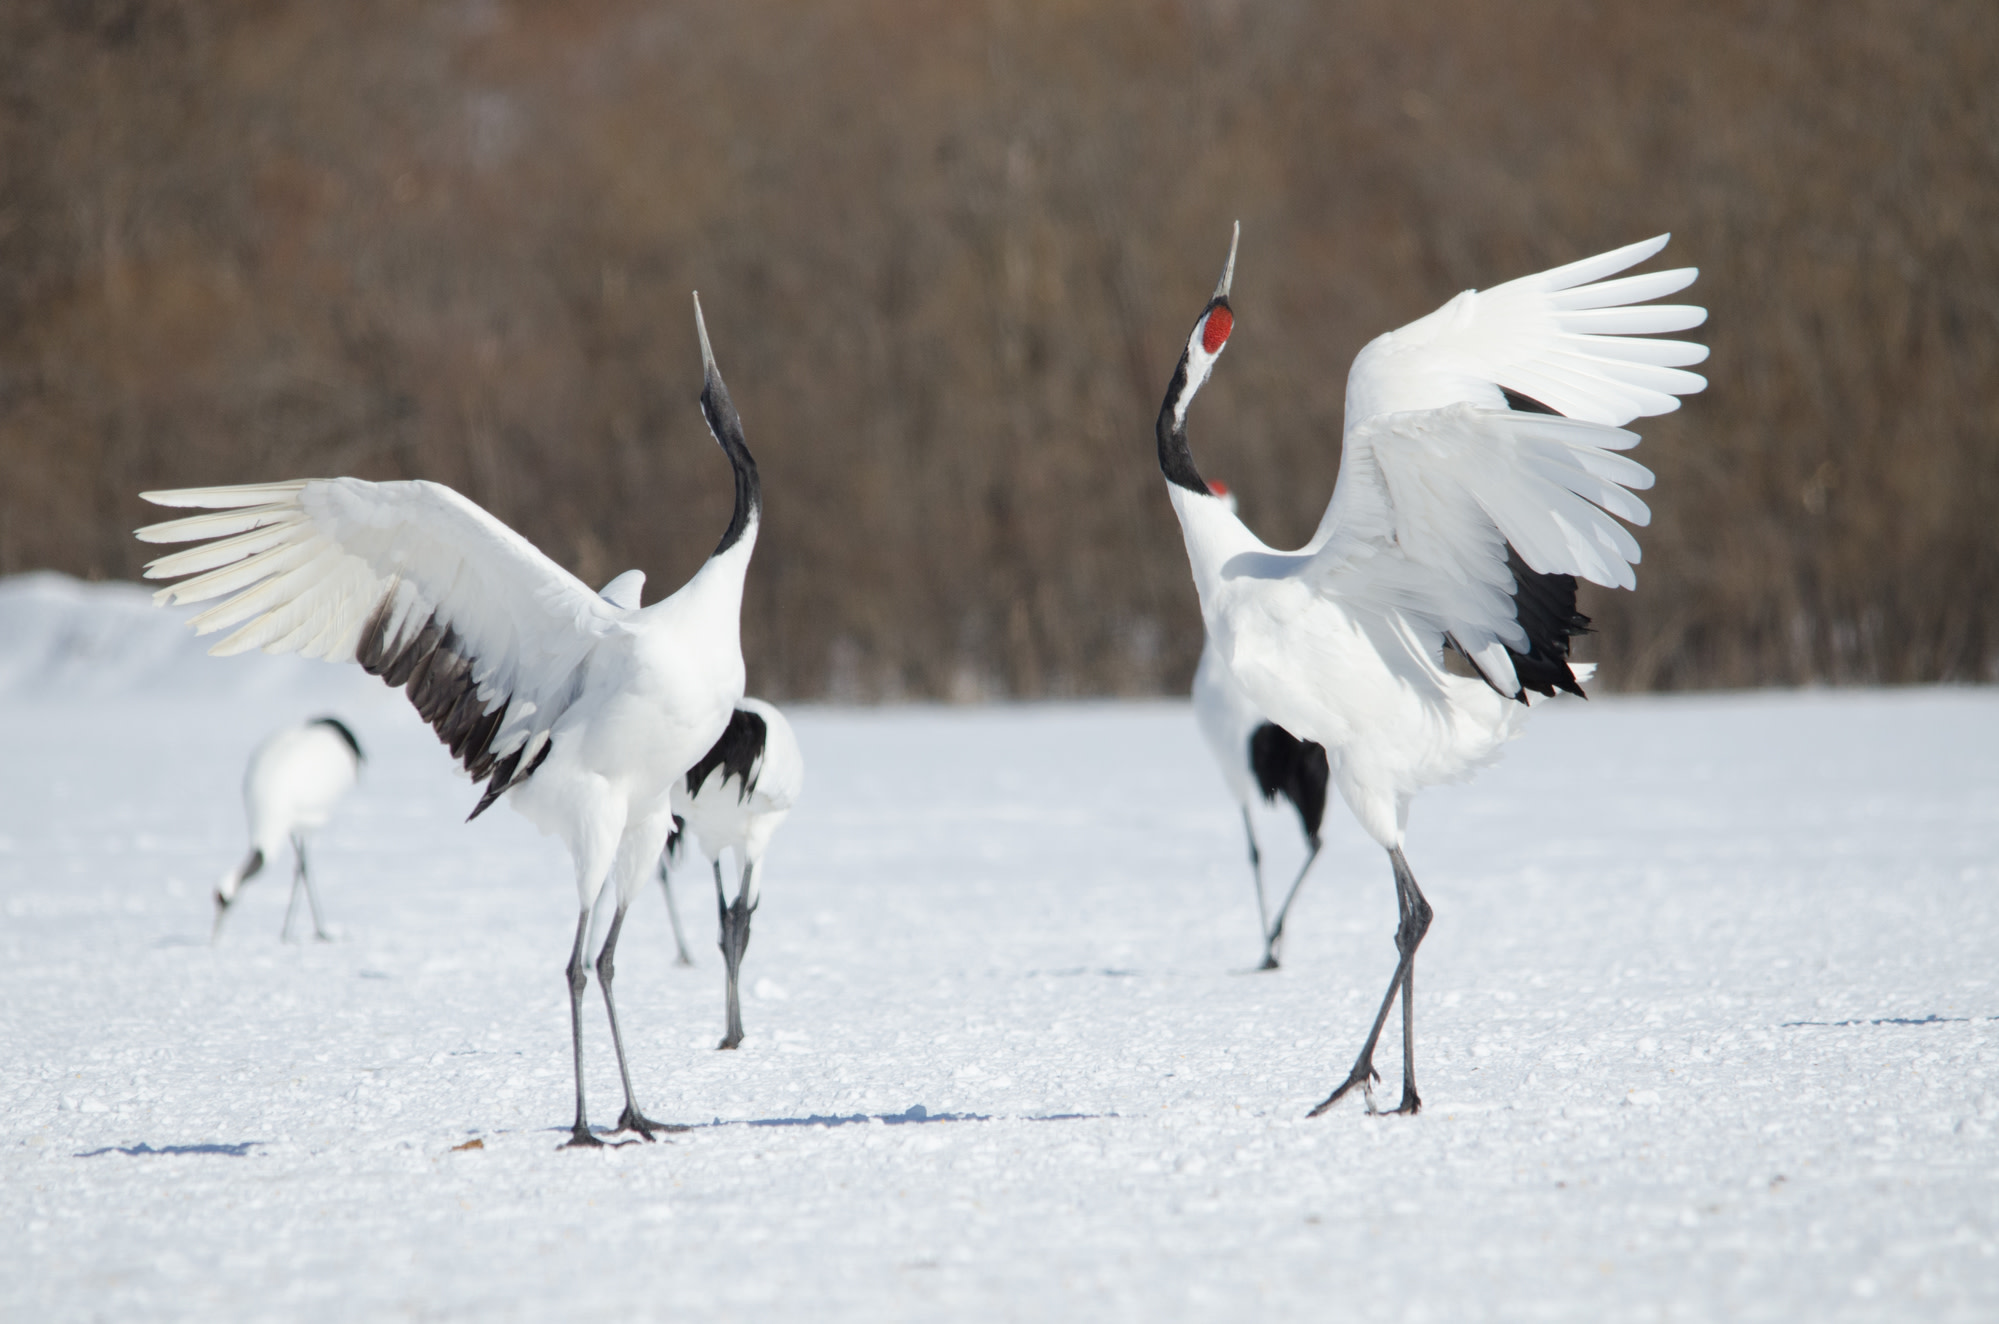 Two cranes flourish their wings at each other at Tsurui's crane sanctuary.